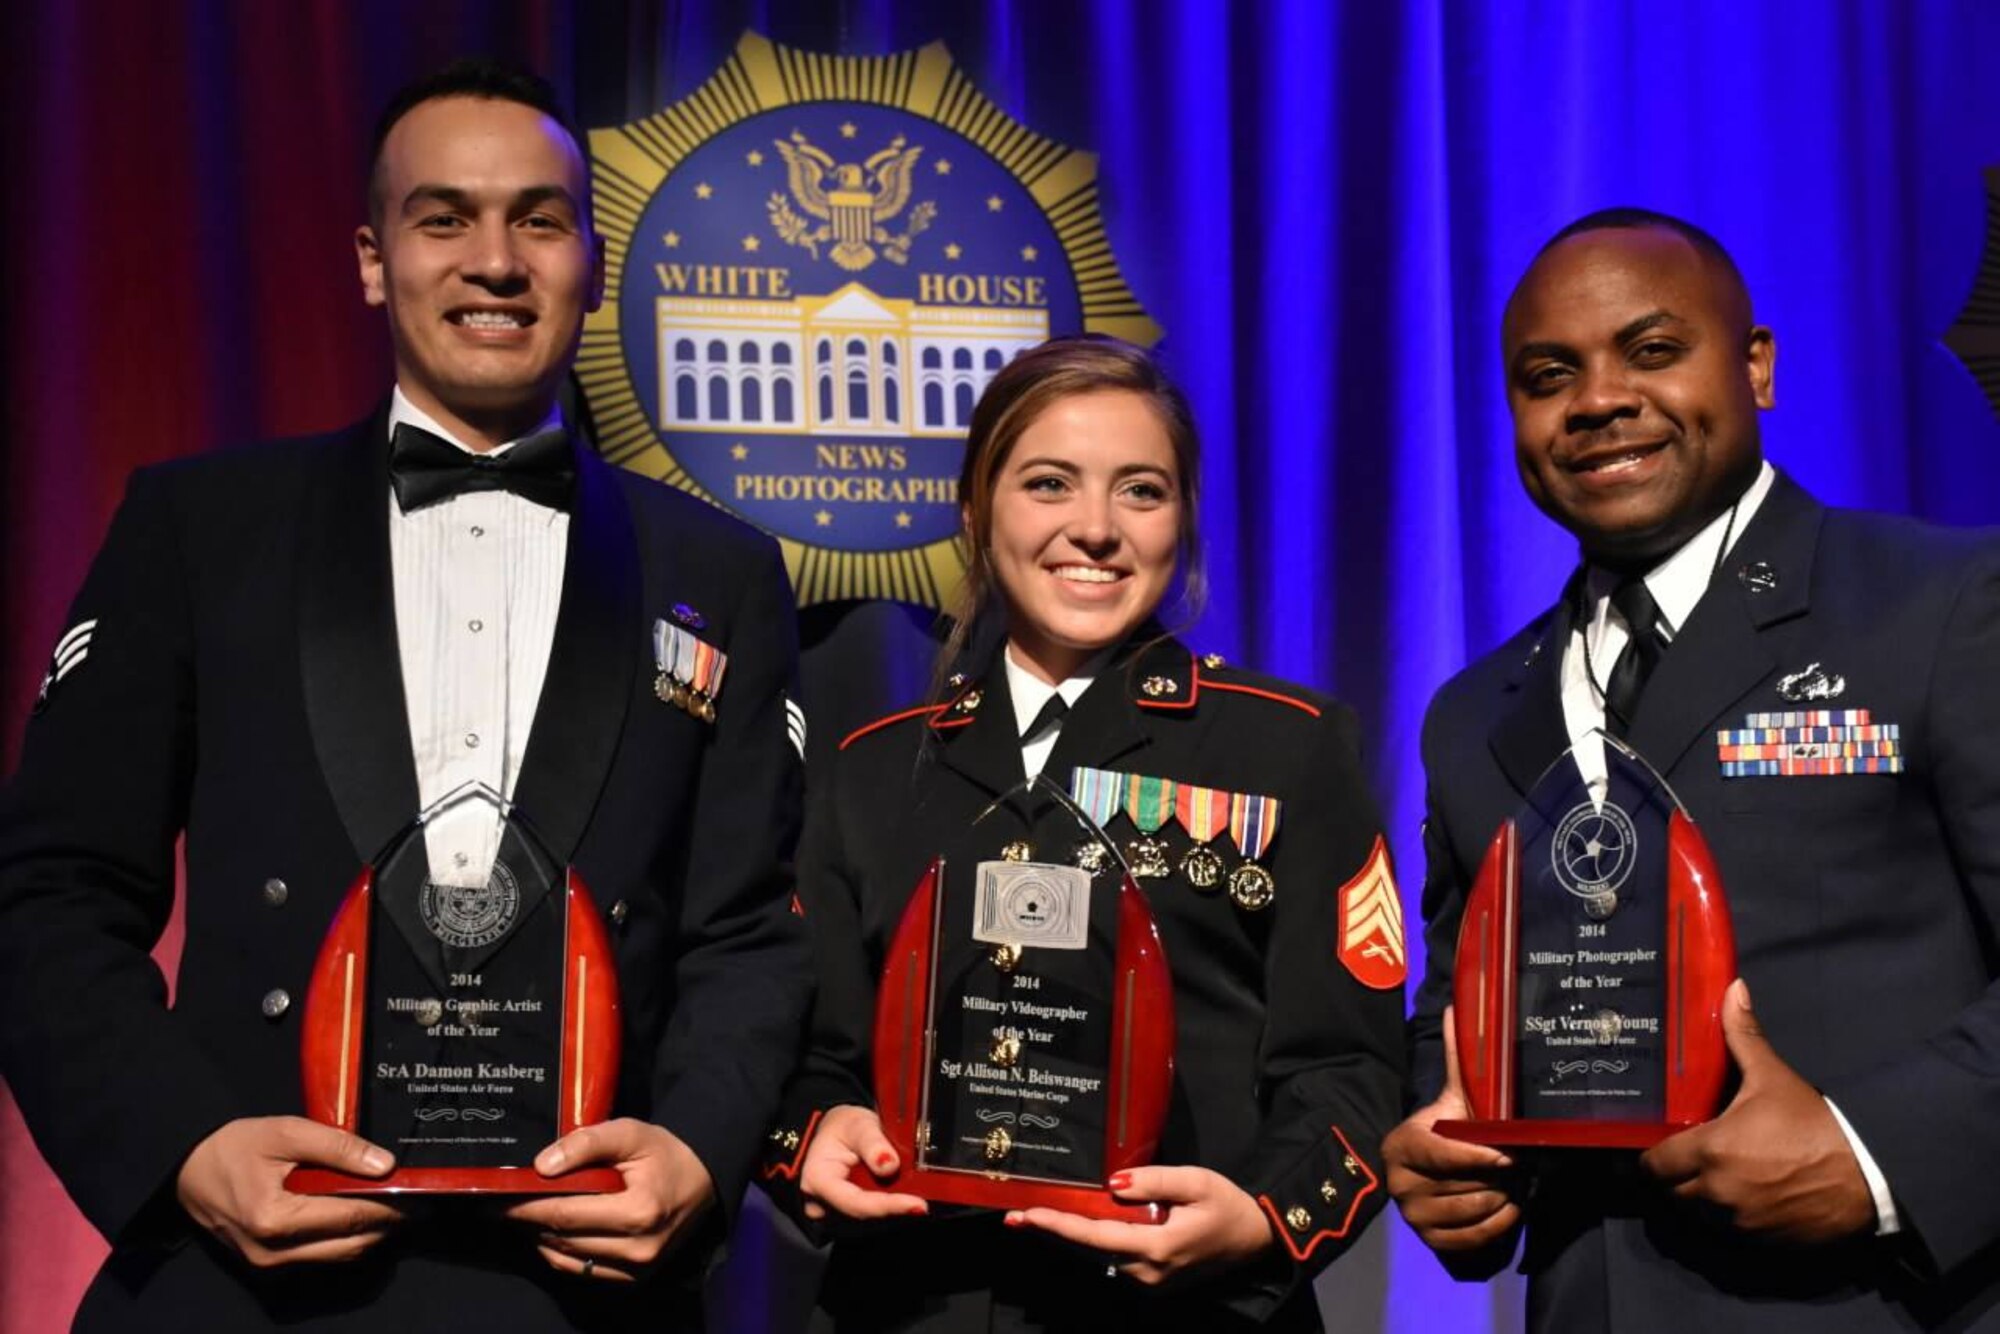 U.S. Air Force Senior Airman Damon Kasberg (left), 2014 Visual Information Award Program Military Graphic Artist of the Year from 86th Airlift Wing Public Affairs, U.S. Marine Corps Sgt. Allison N. Beiswanger, 2014 VIAP Military Videographer of the Year  from Office of USMC Communications (middle) and USAF Staff Sgt. Vernon Young (right),2014 VIAP Military Photographer of the Year from Defense Media Activity Airman Magazine, pose for a photo with their awards May 17, 2015, in the District of Columbia. Kasberg was also awarded Military Graphic Artist of the Year for 2015 and will attend a ceremony in D.C. on June 18. (Courtesy Photo)